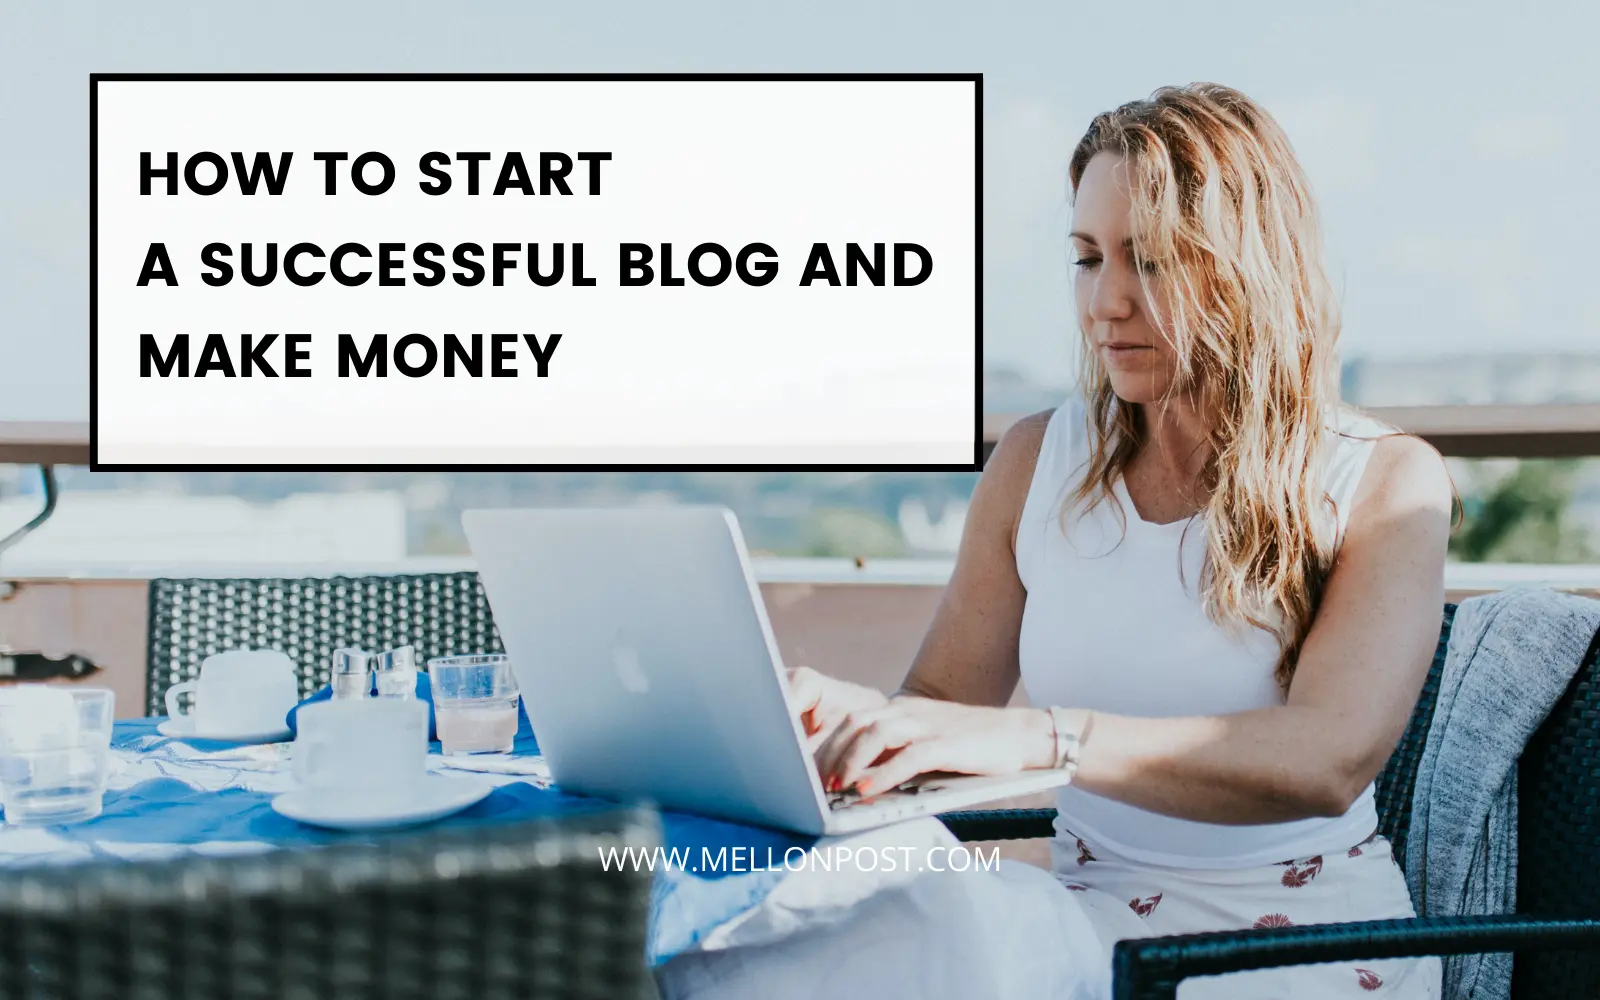 start a successful blog and manke money